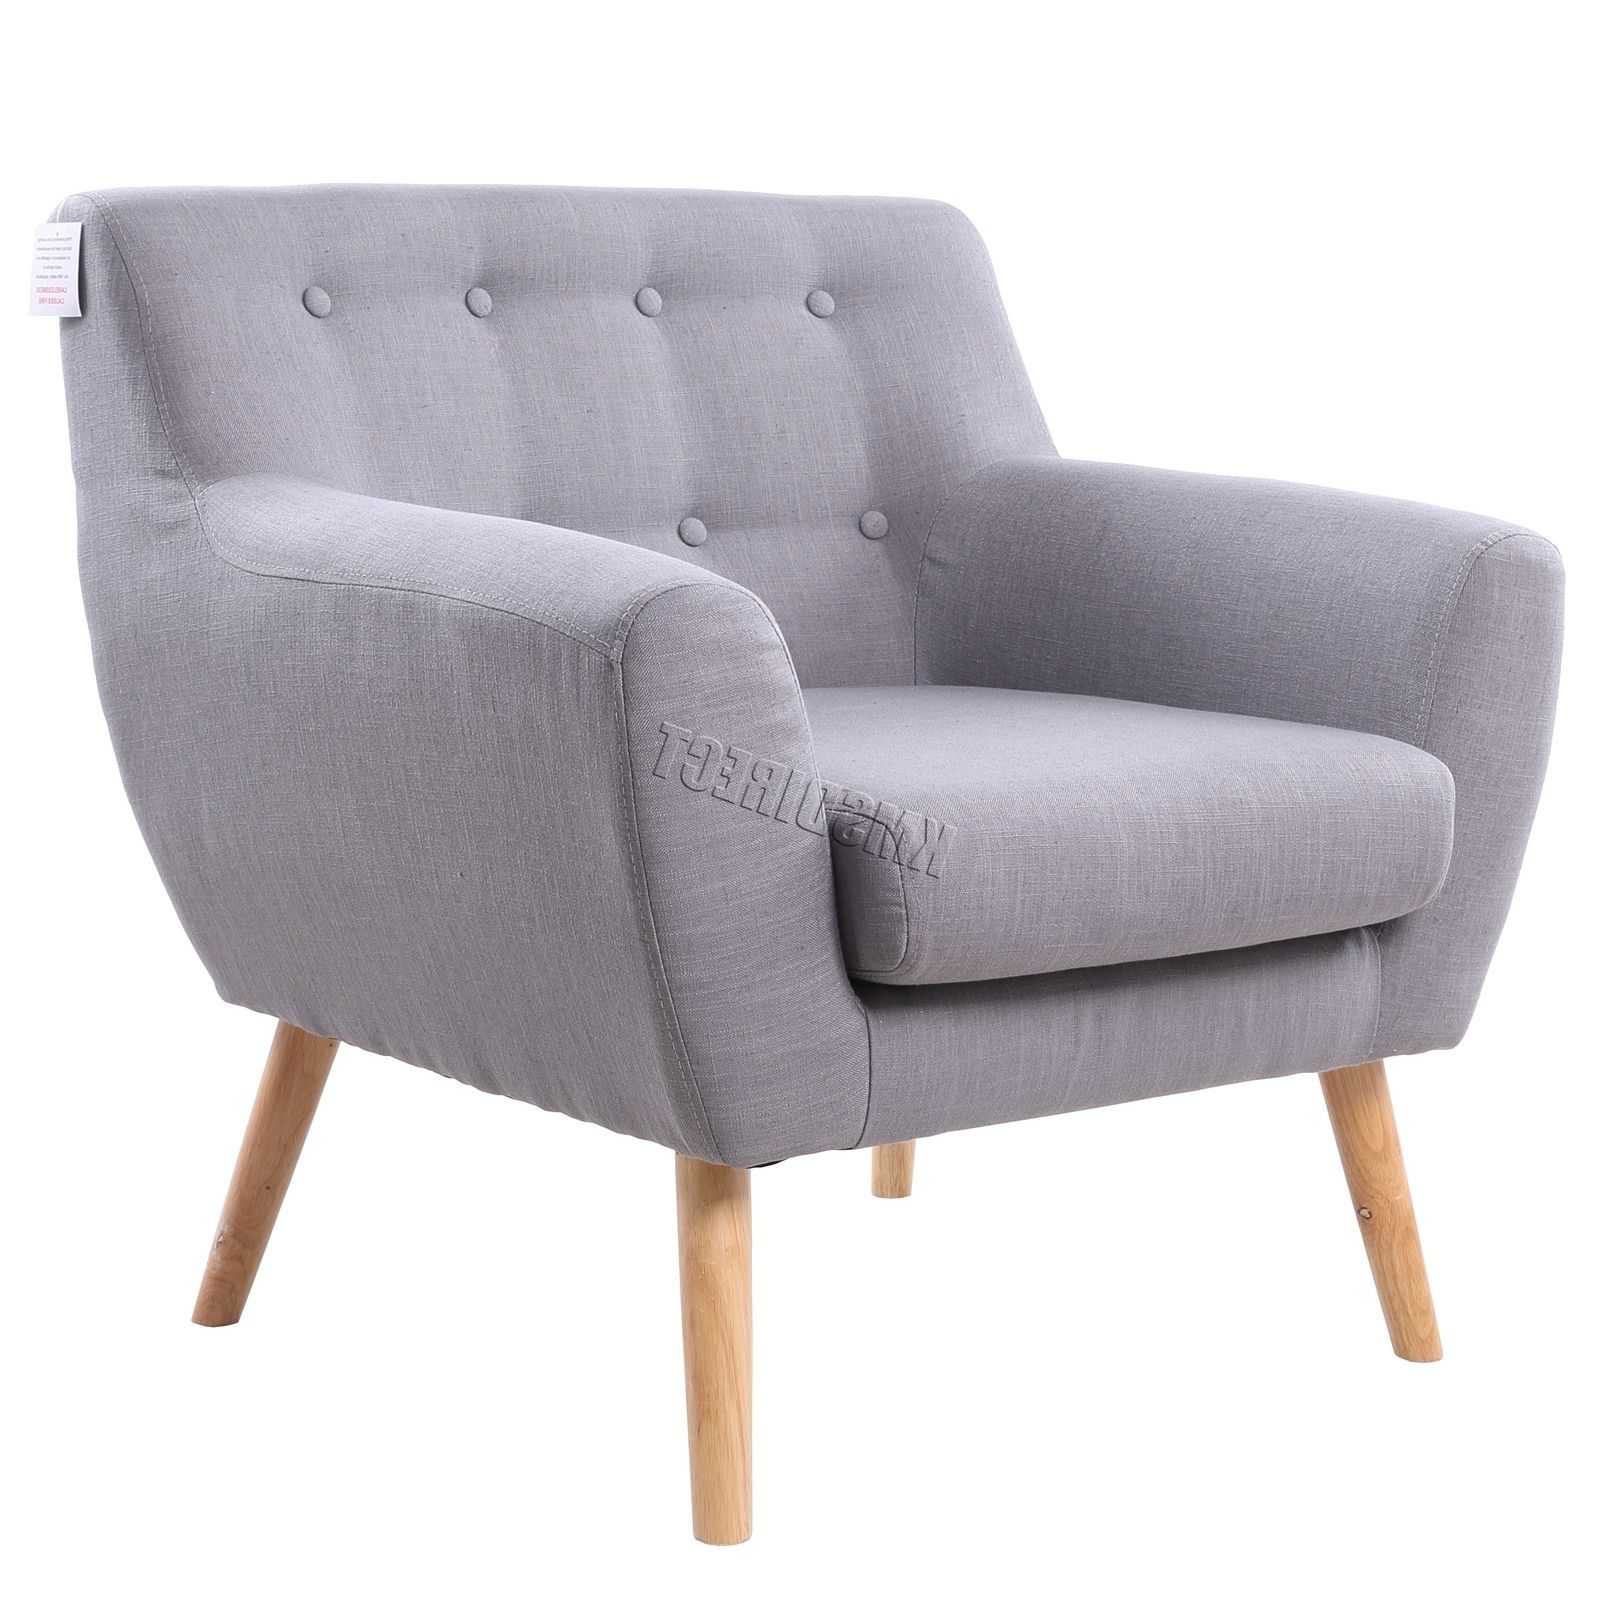 Popular Foxhunter Linen Fabric 1 Single Seat Sofa Tub Armchair Dining Room Within Single Sofas (View 1 of 20)